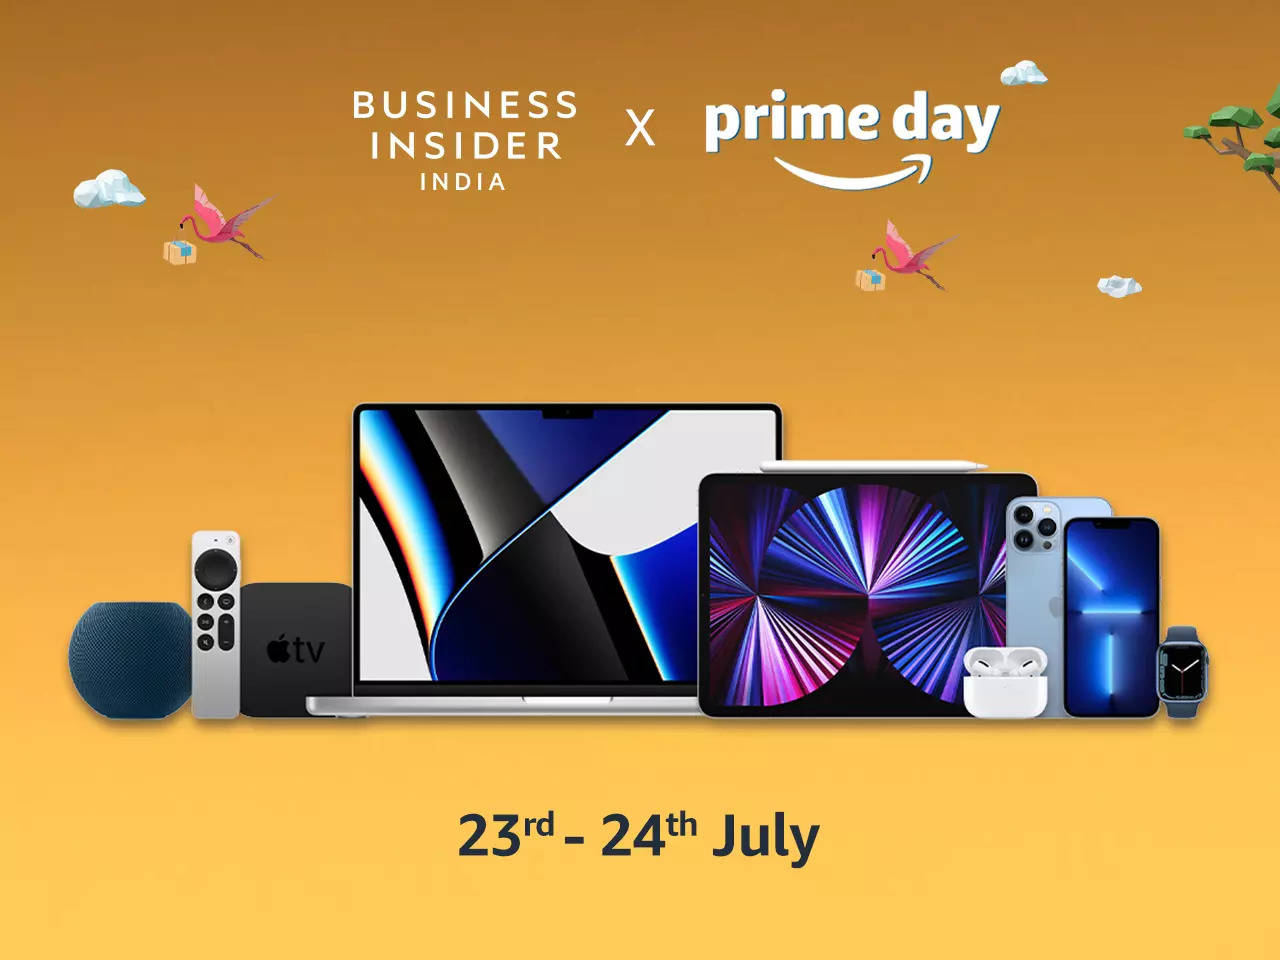 https://www.businessinsider.in/photo/93060235/best-prime-day-deals-on-apple-devices-discount-and-offers-on-iphone-13-series-latest-ipad-macbook-airpods-and-more.jpg?imgsize=42794